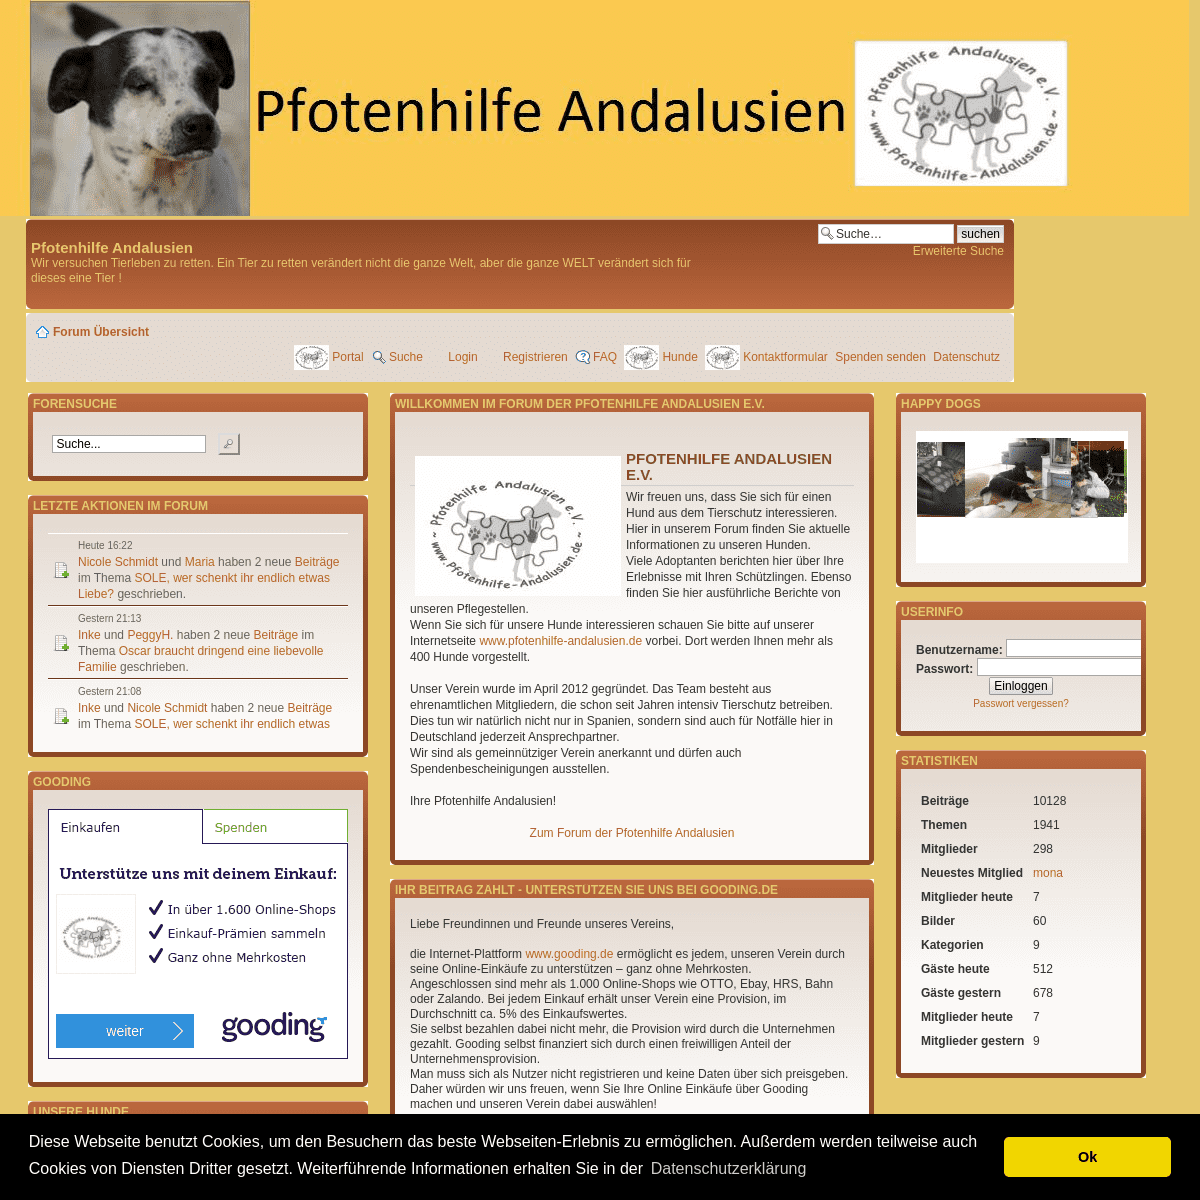 A complete backup of pfotenhilfe-andalusien.com